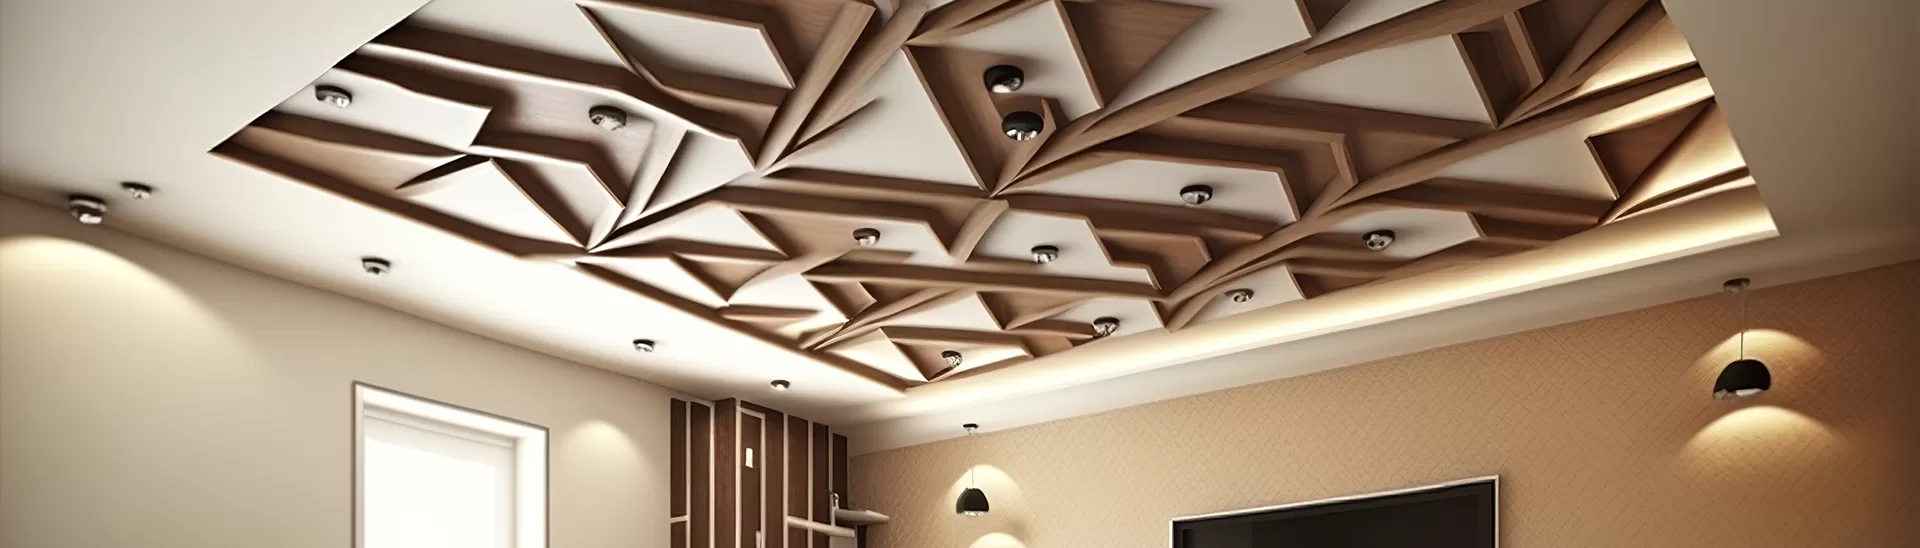 False ceiling interior design with plan and section view dwg file - Cadbull